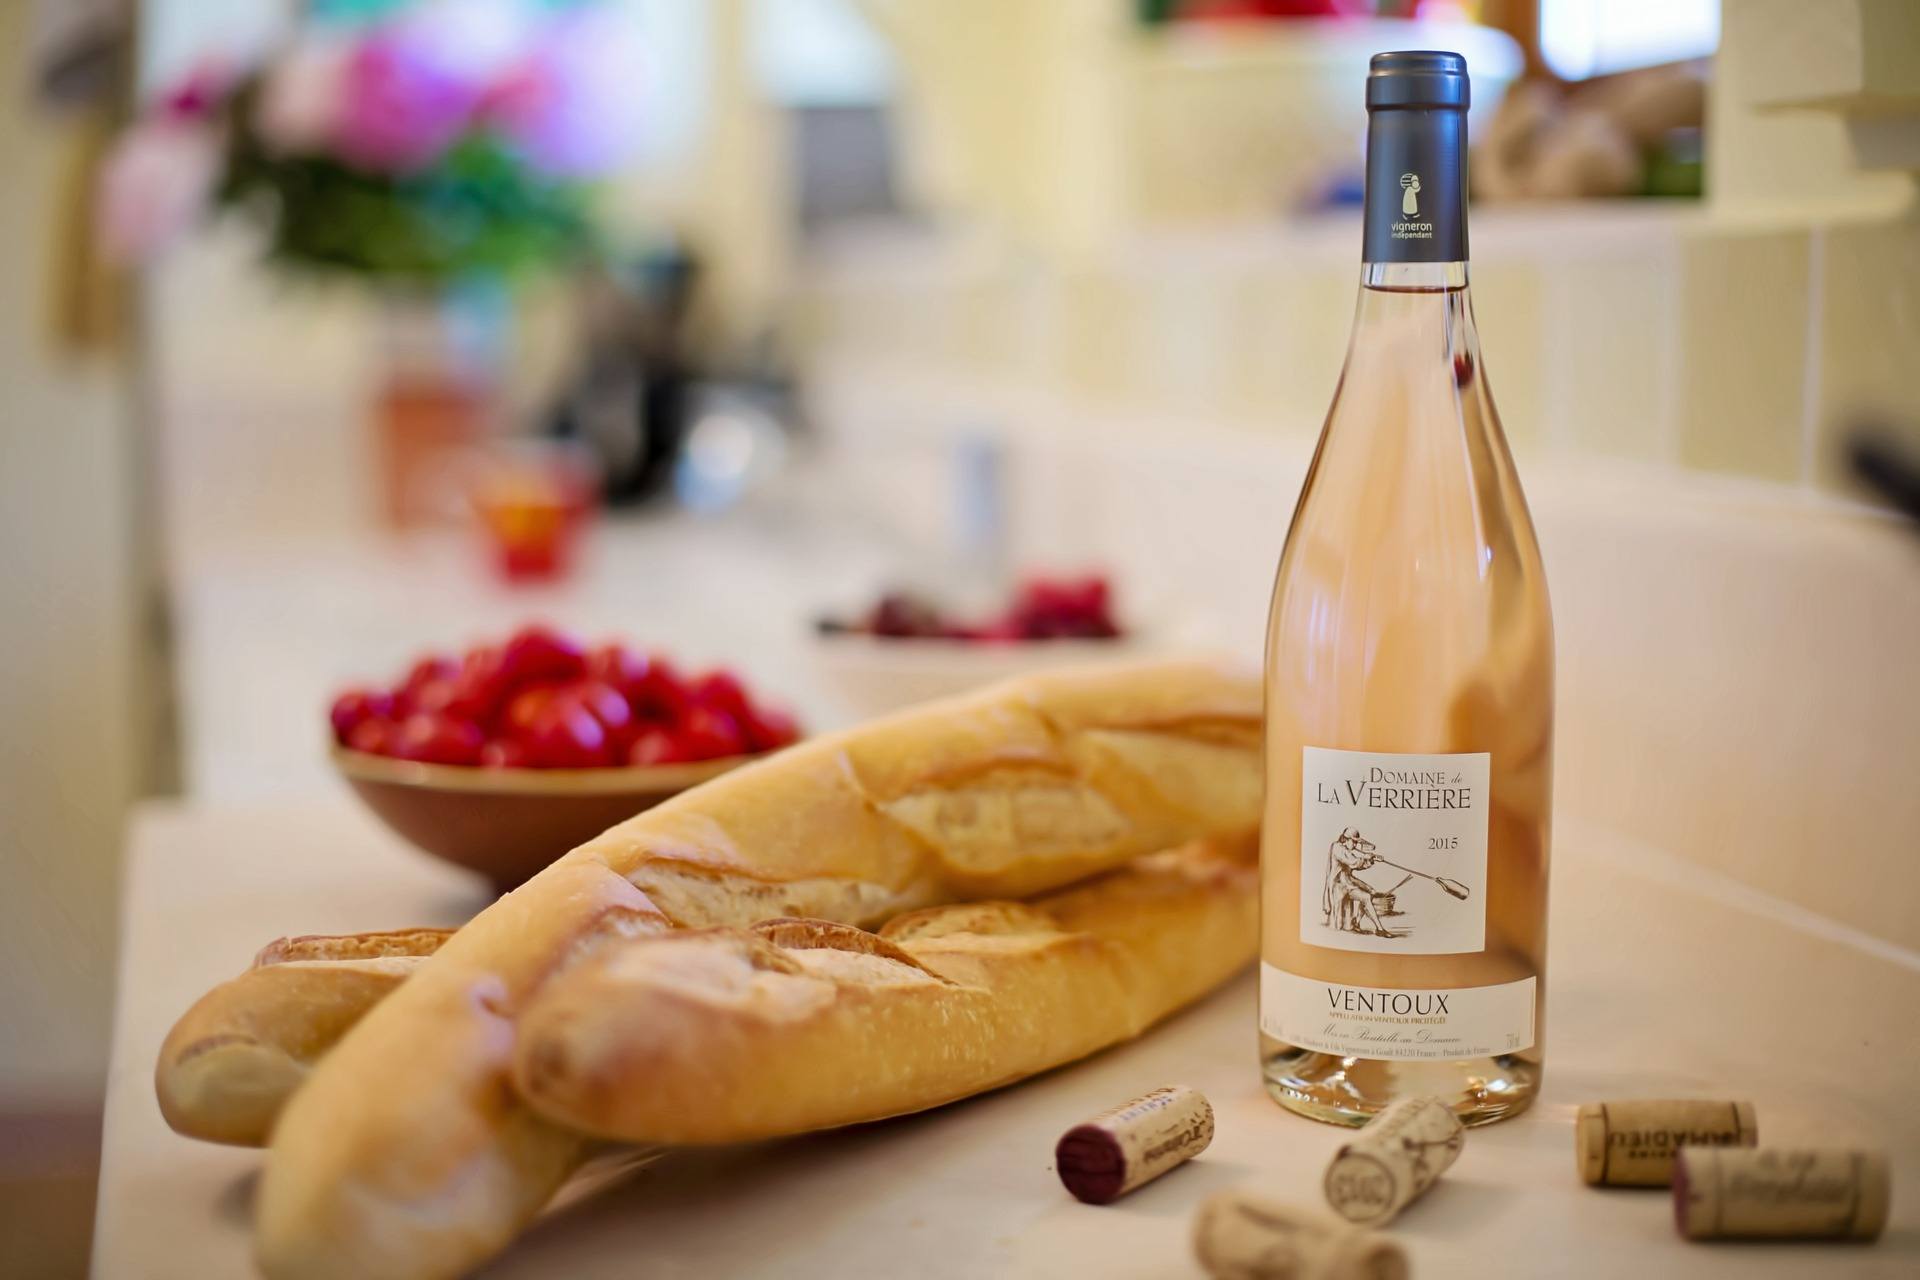 Baguette and wine